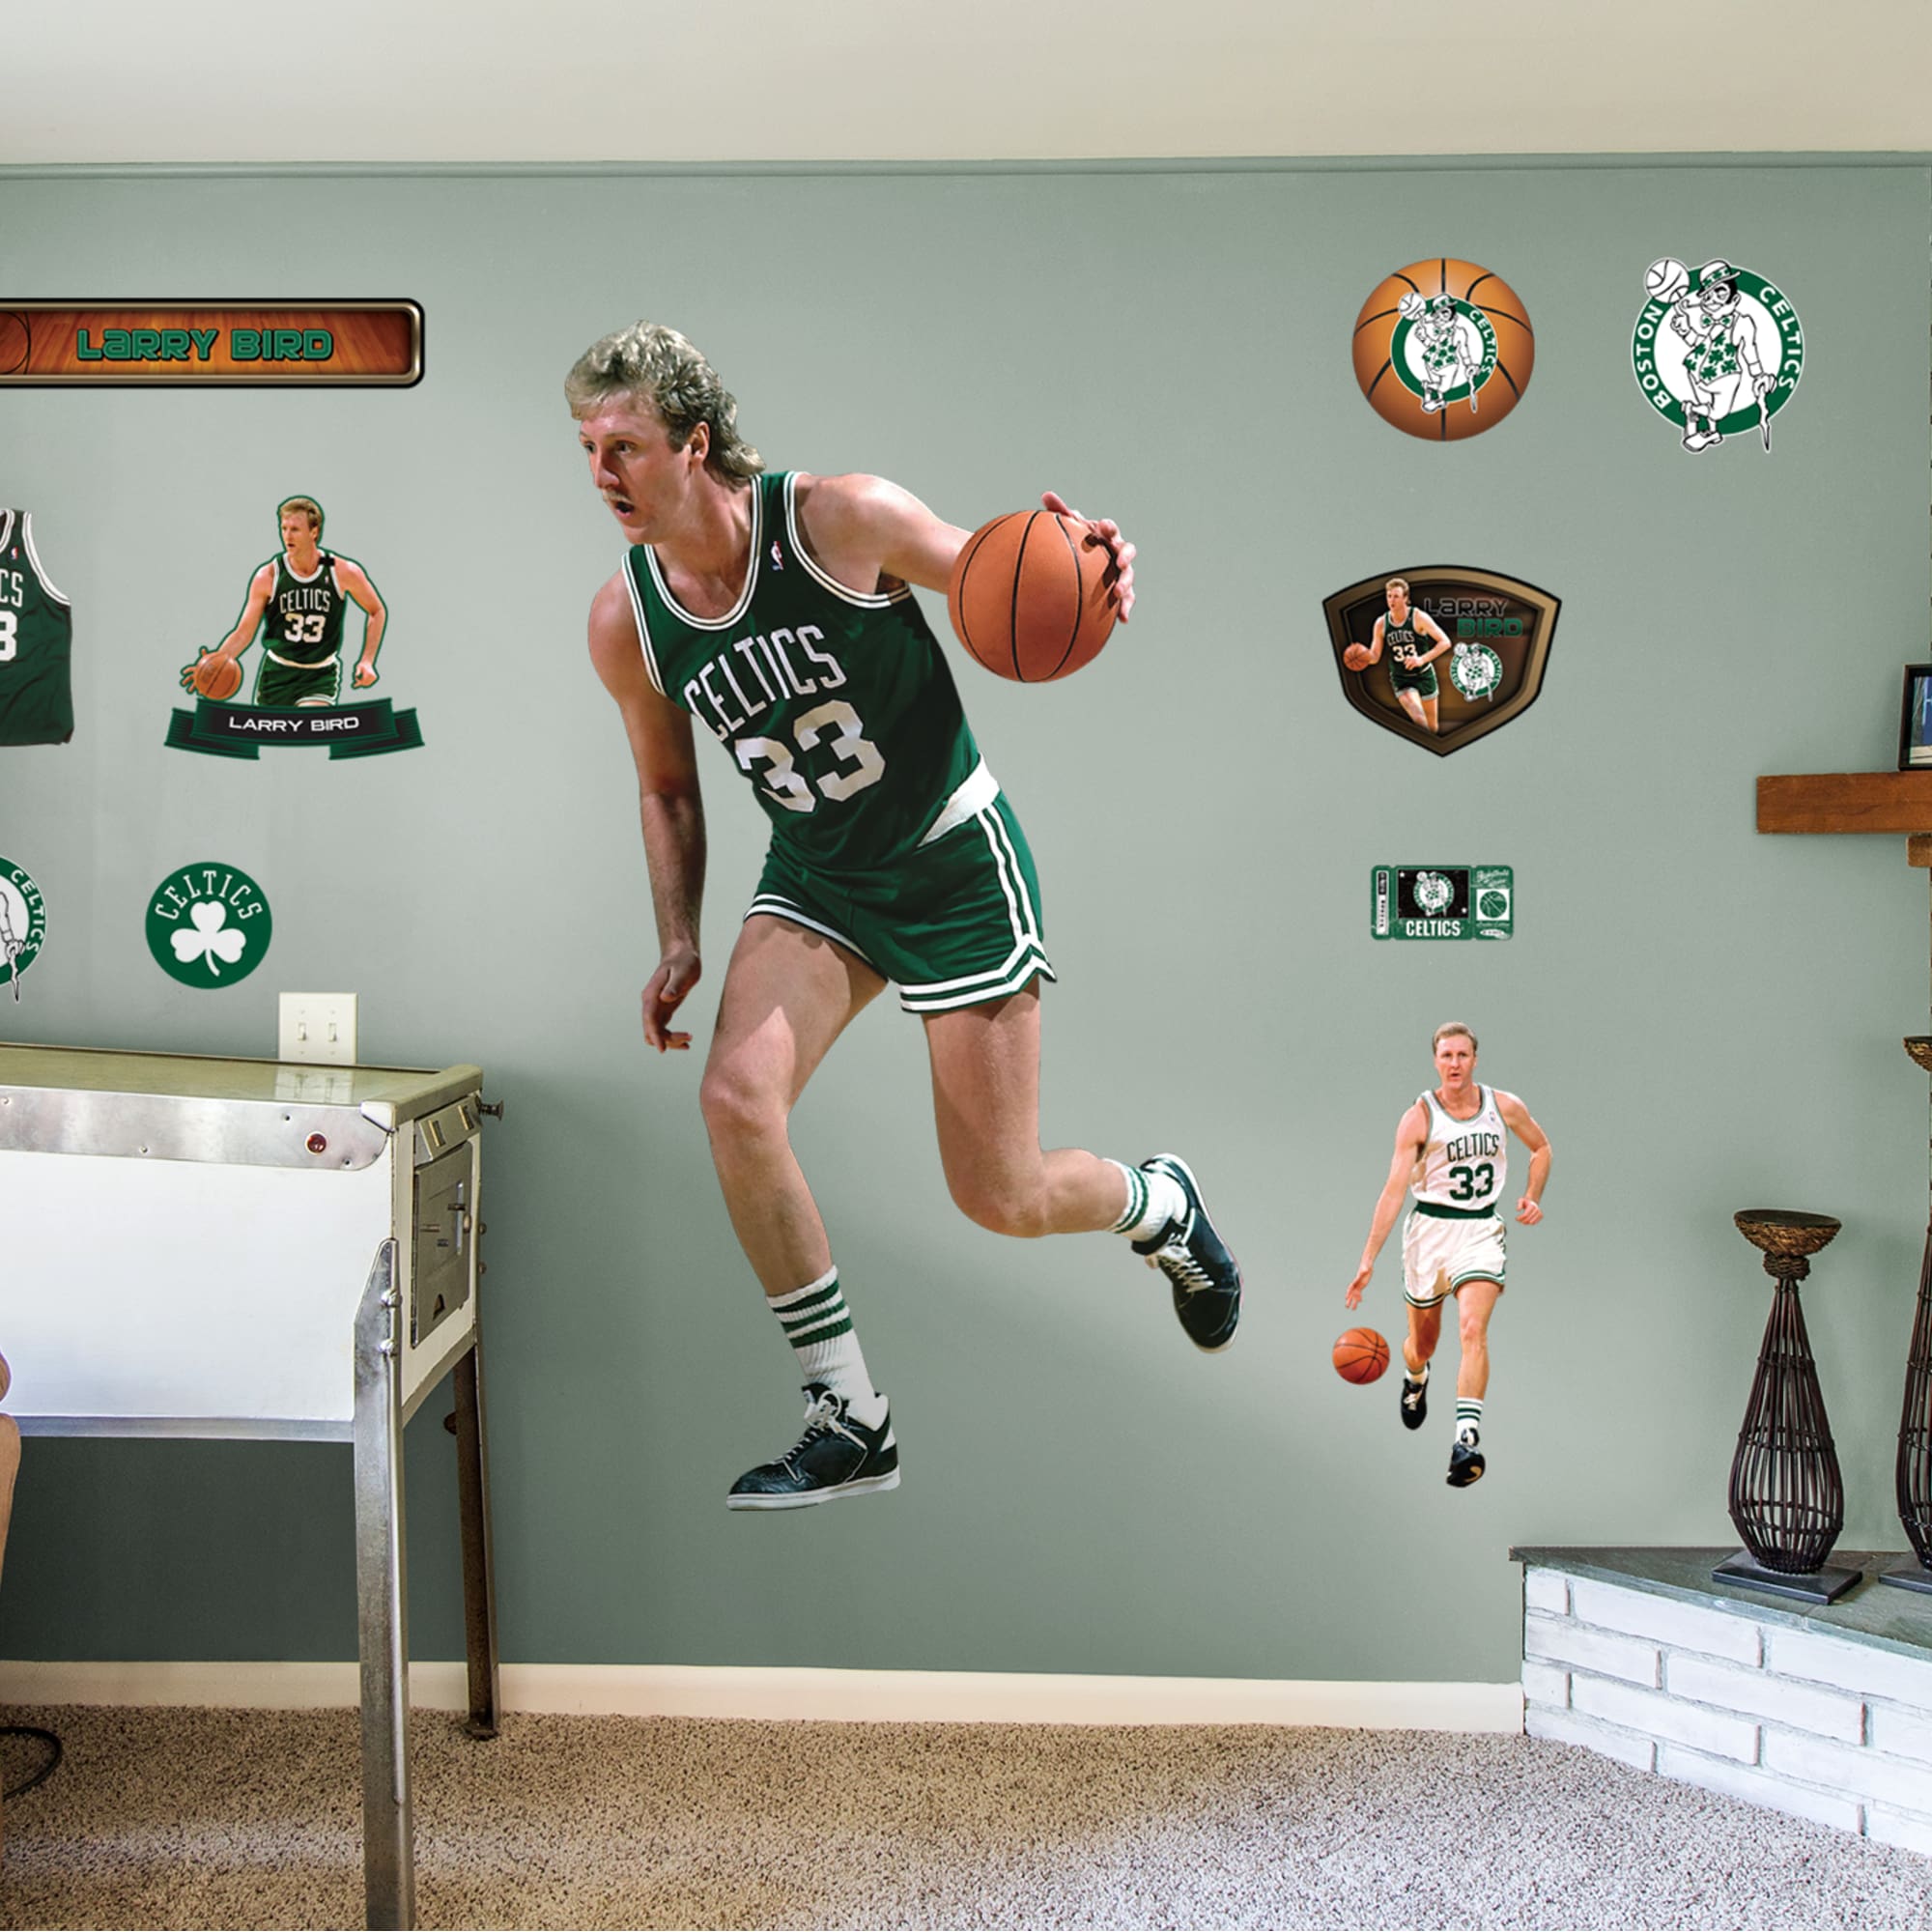 Larry Bird for Boston Celtics - Officially Licensed NBA Removable Wall Decal Life-Size Athlete + 11 Decals (45"W x 78"H) by Fath